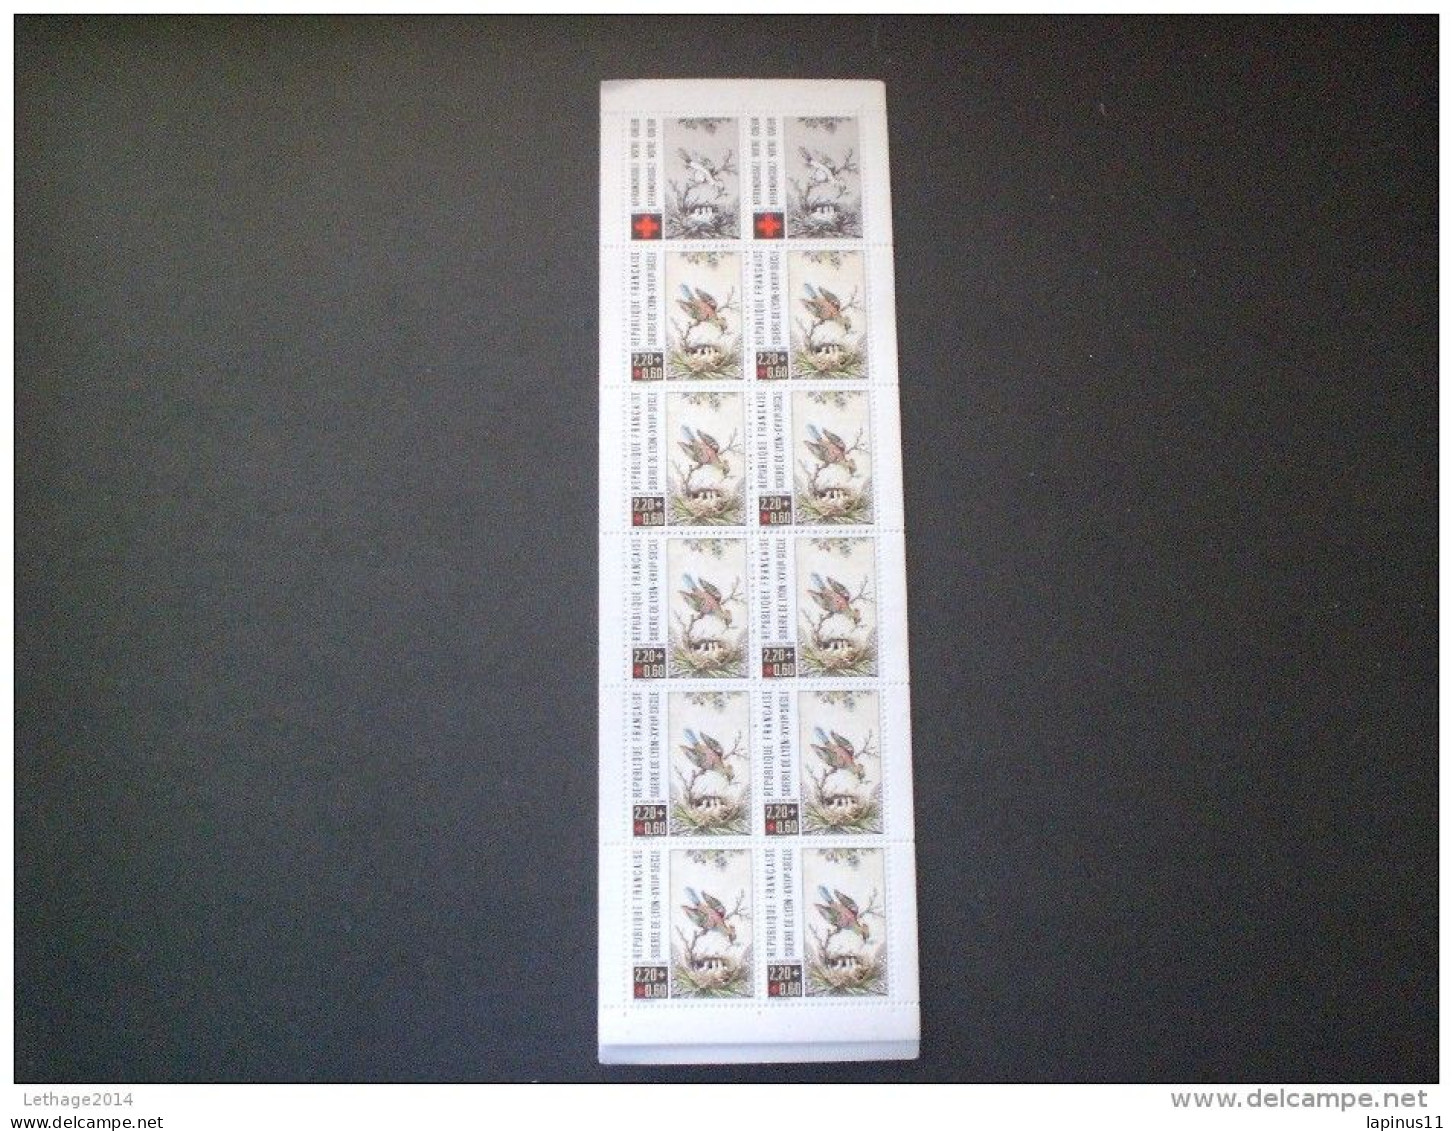 STAMPS FRANCE CARNETS 1985 RED CROSS - Personen